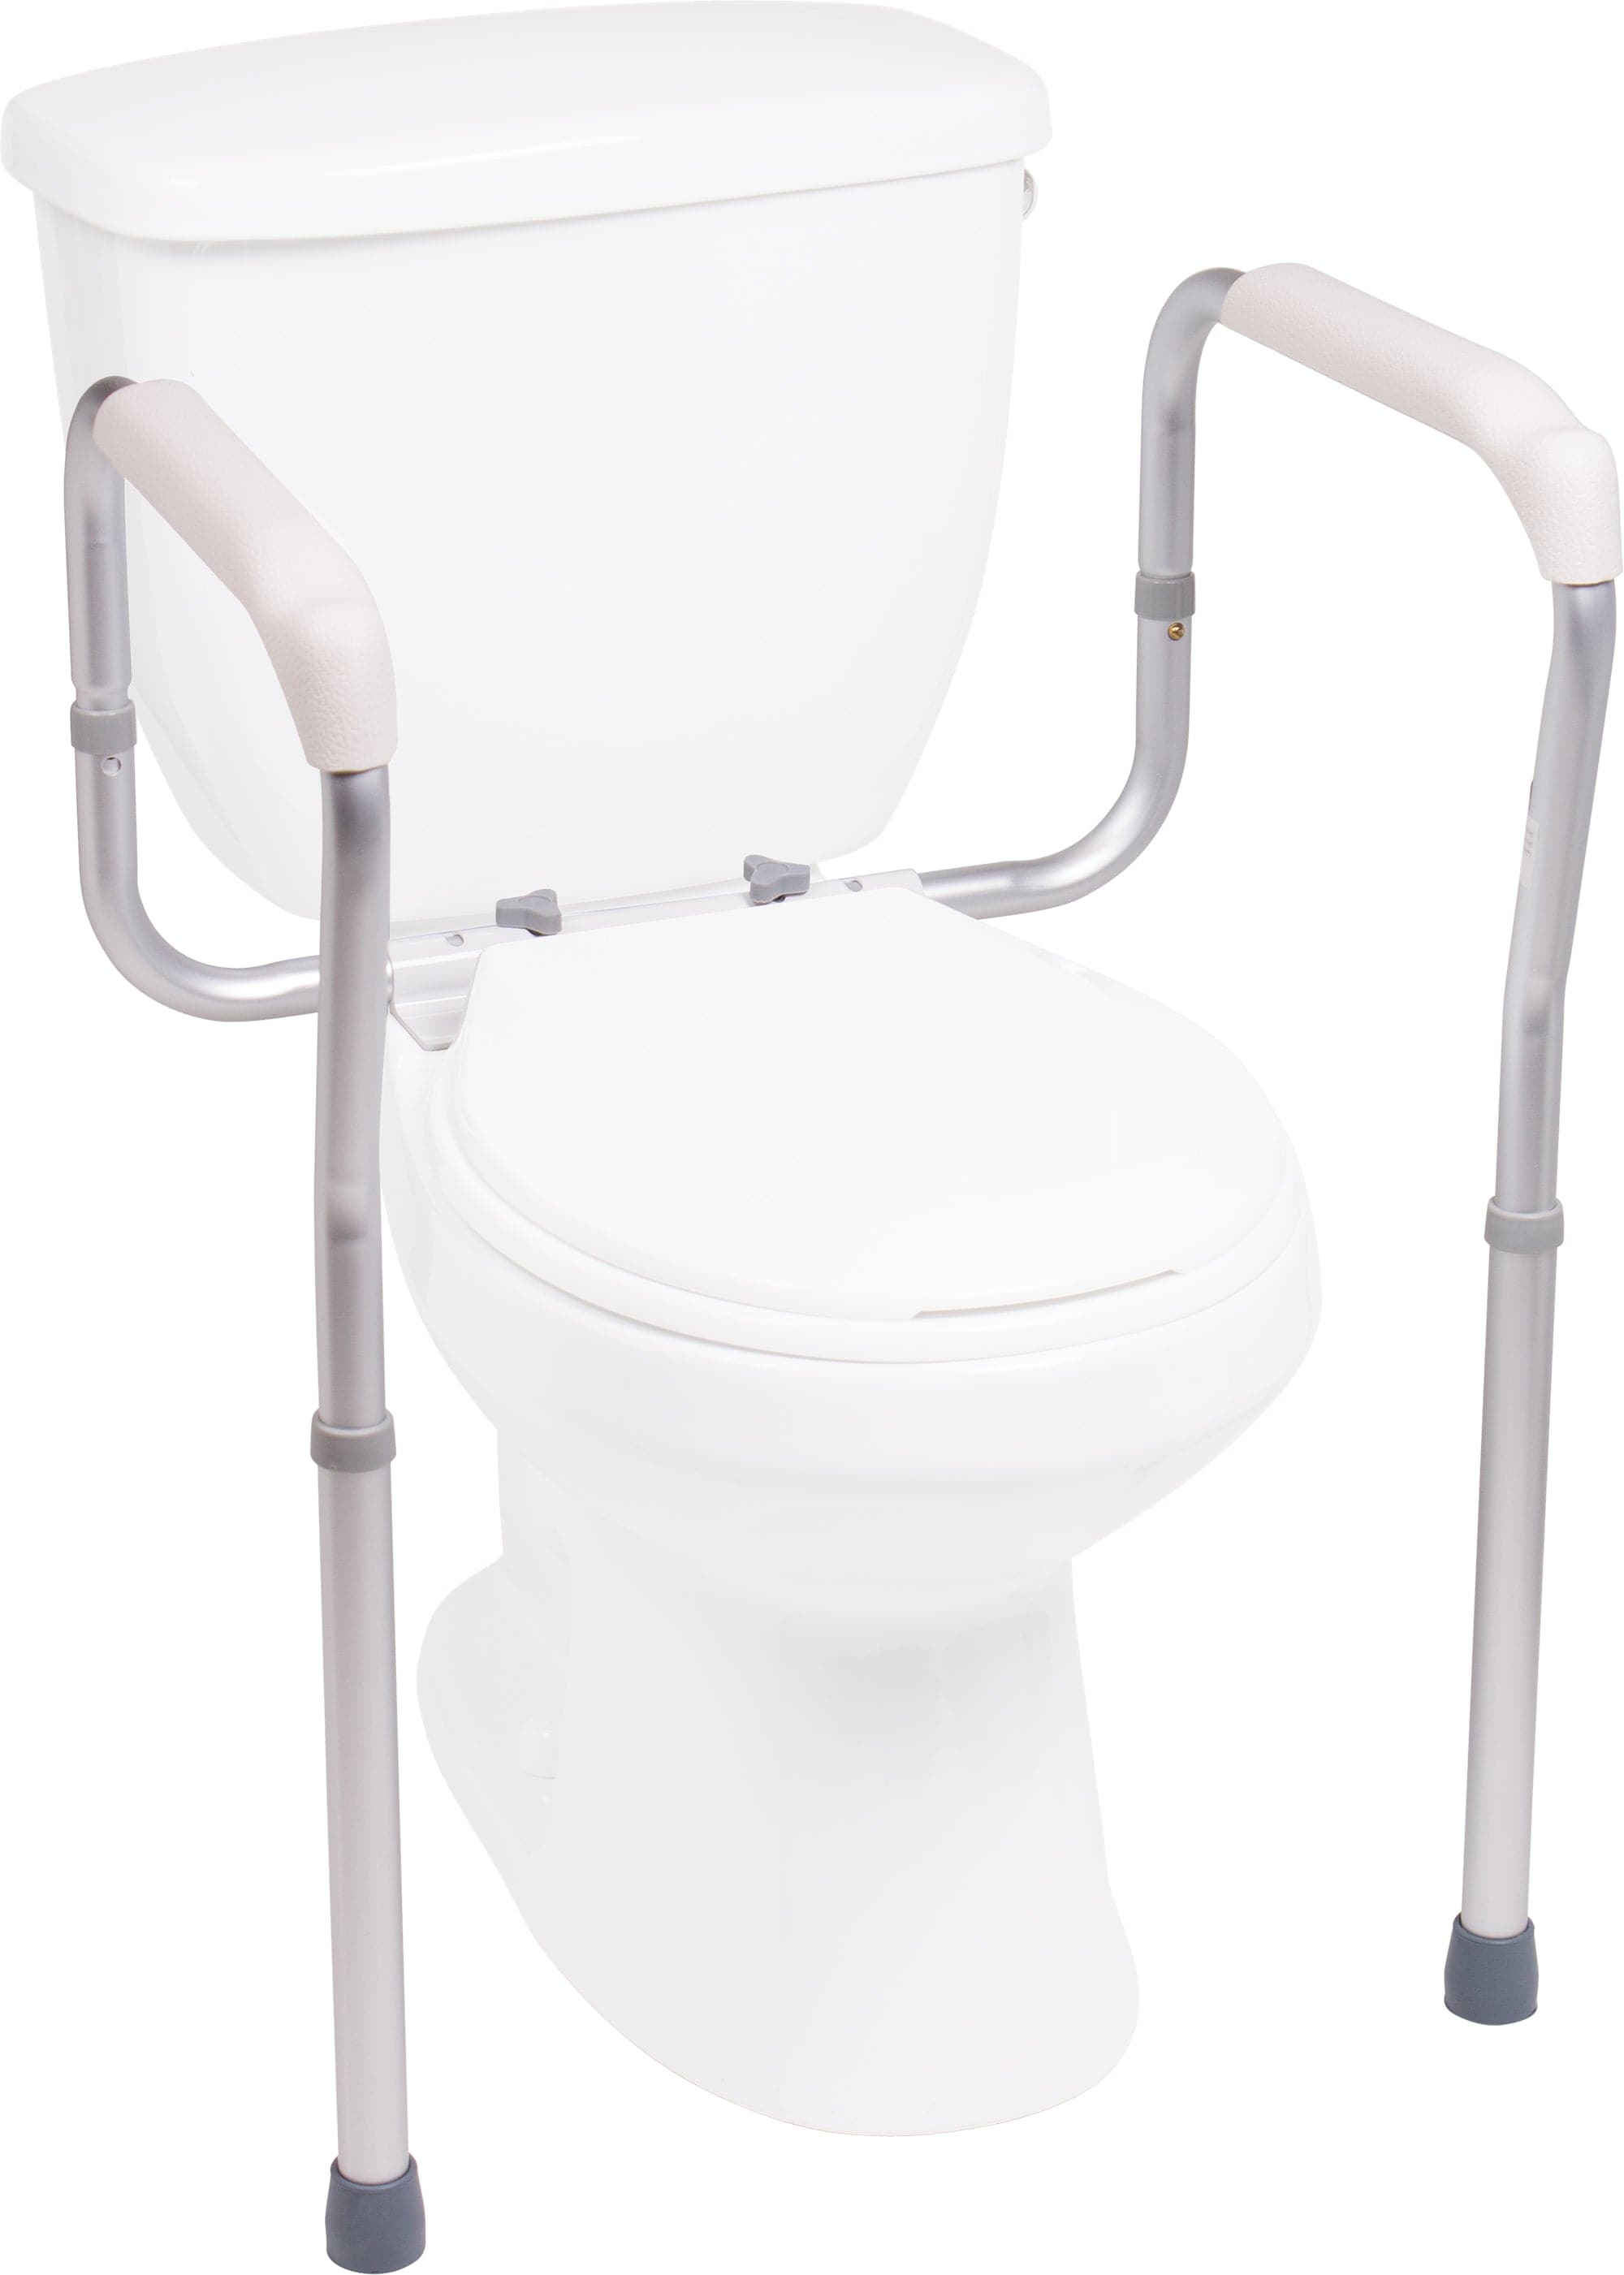 Compass Health Safety Frames Compass Health ProBasics Toilet Safety Frame